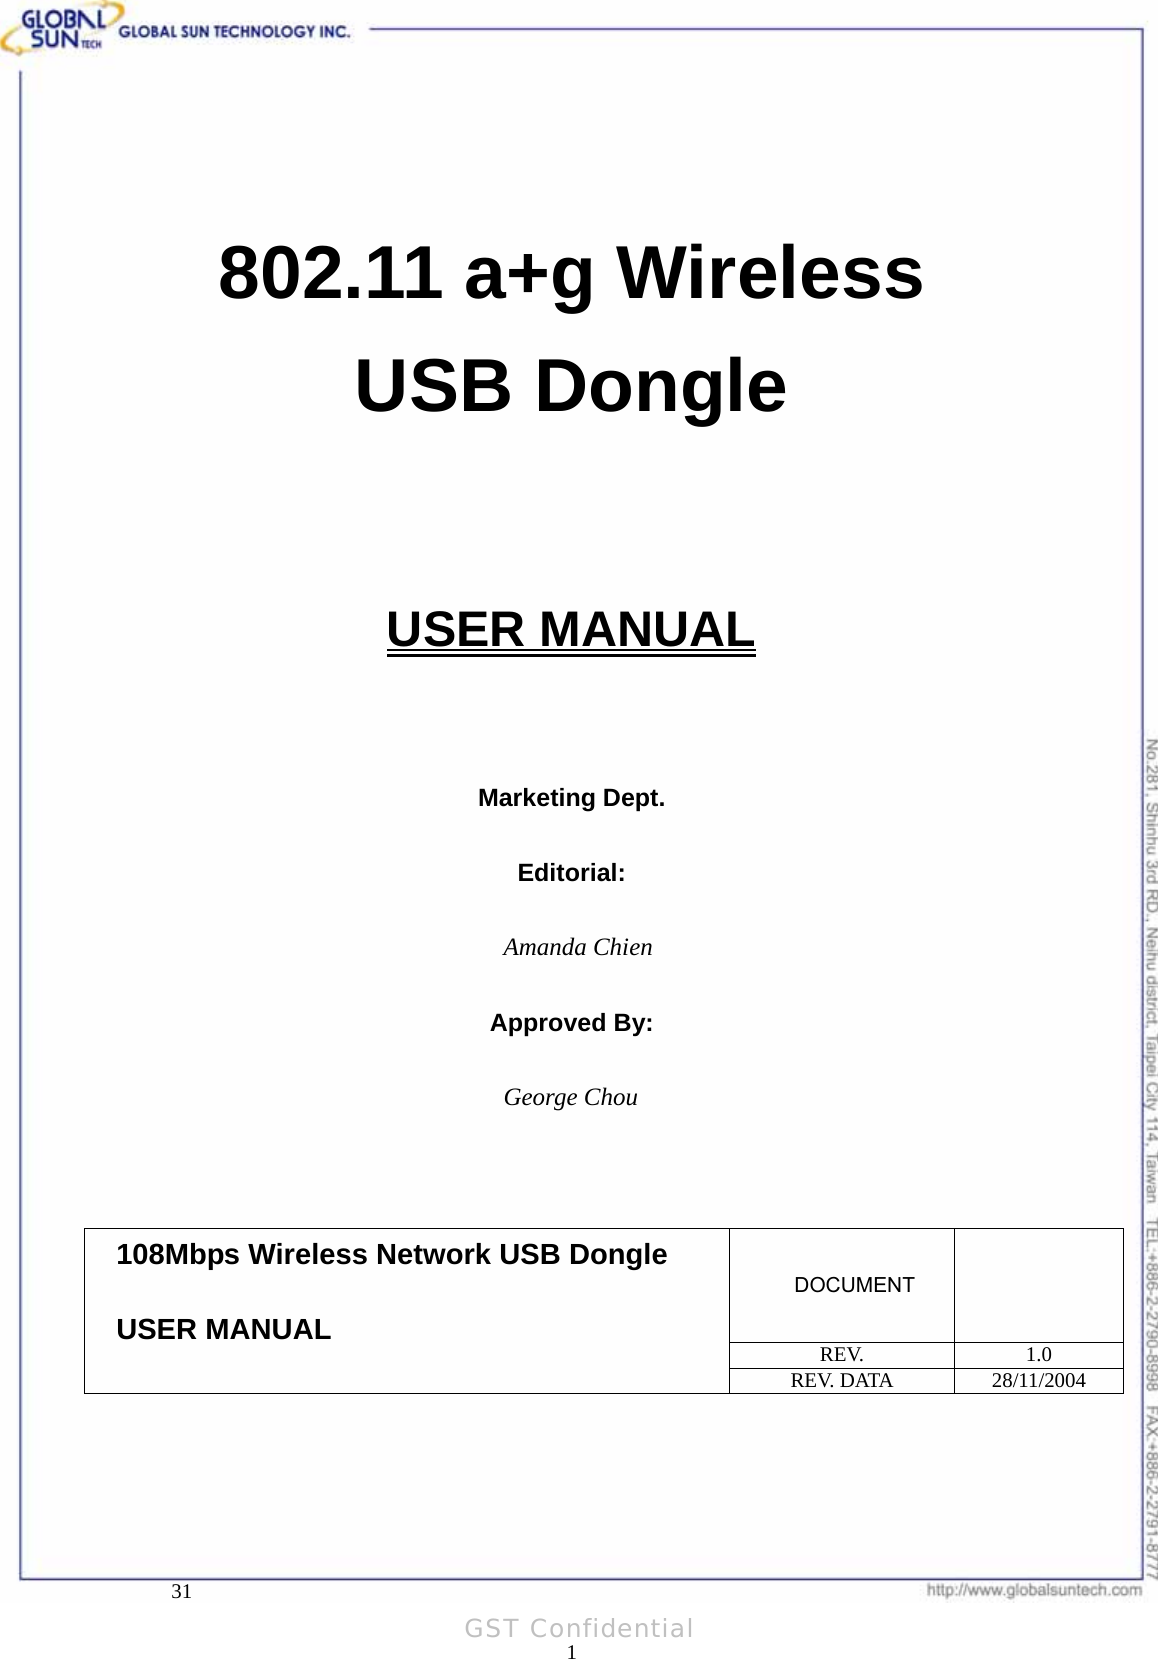  Product: 802.11a/g Wireless USB Dongle Model: WL UD 2554 17A   802.11 a+g Wireless   USB Dongle   USER MANUAL    Marketing Dept.  Editorial:  Amanda Chien  Approved By:  George Chou    DOCUMENT  REV. 1.0 108Mbps Wireless Network USB Dongle USER MANUAL REV. DATA  28/11/2004     31 1GST Confidential 